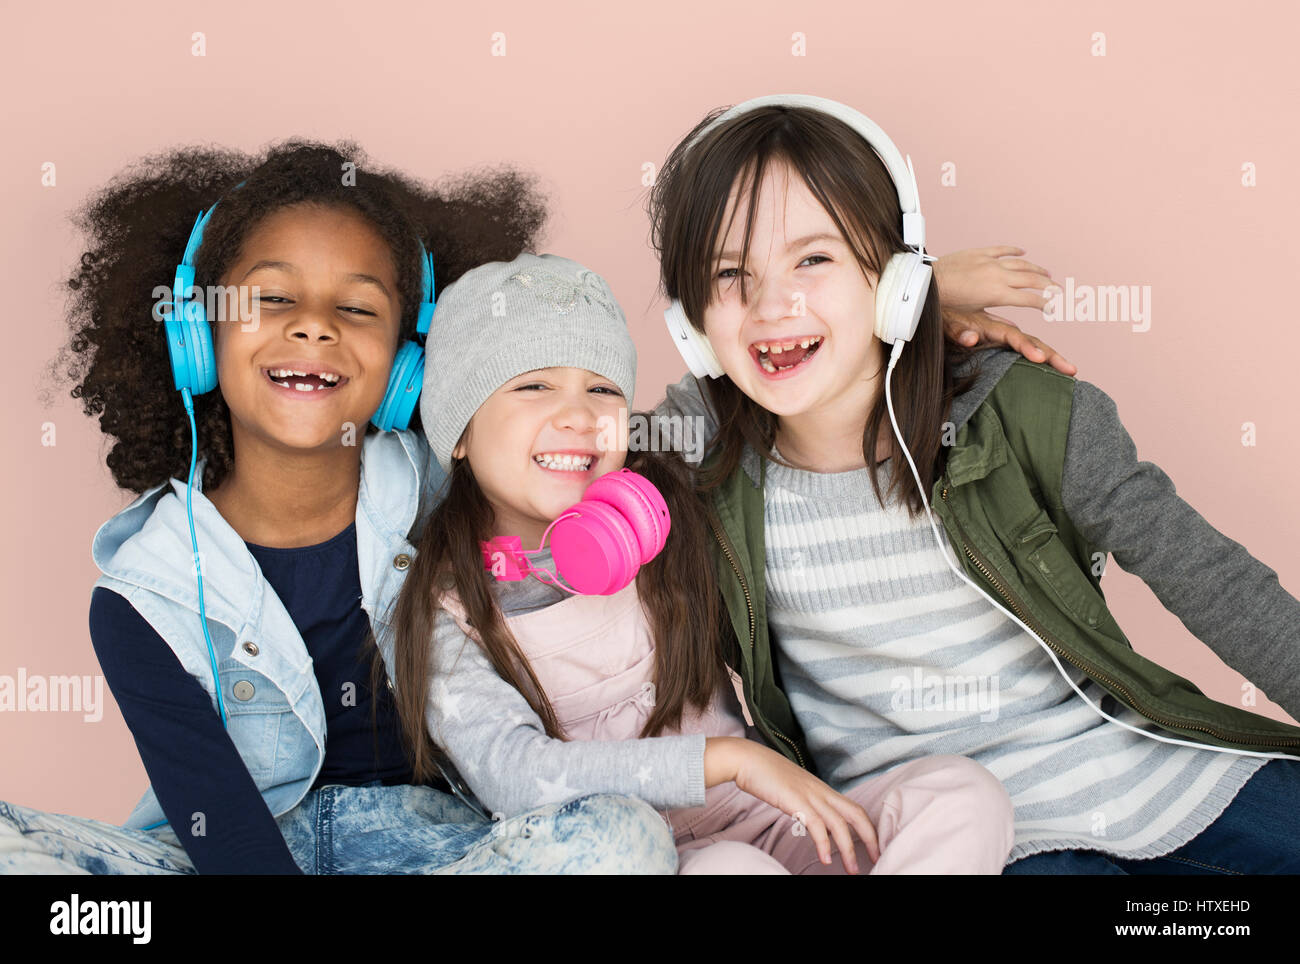 Group of Little Girls Studio Smiling Wearing Headphones and Winter Clothes Stock Photo